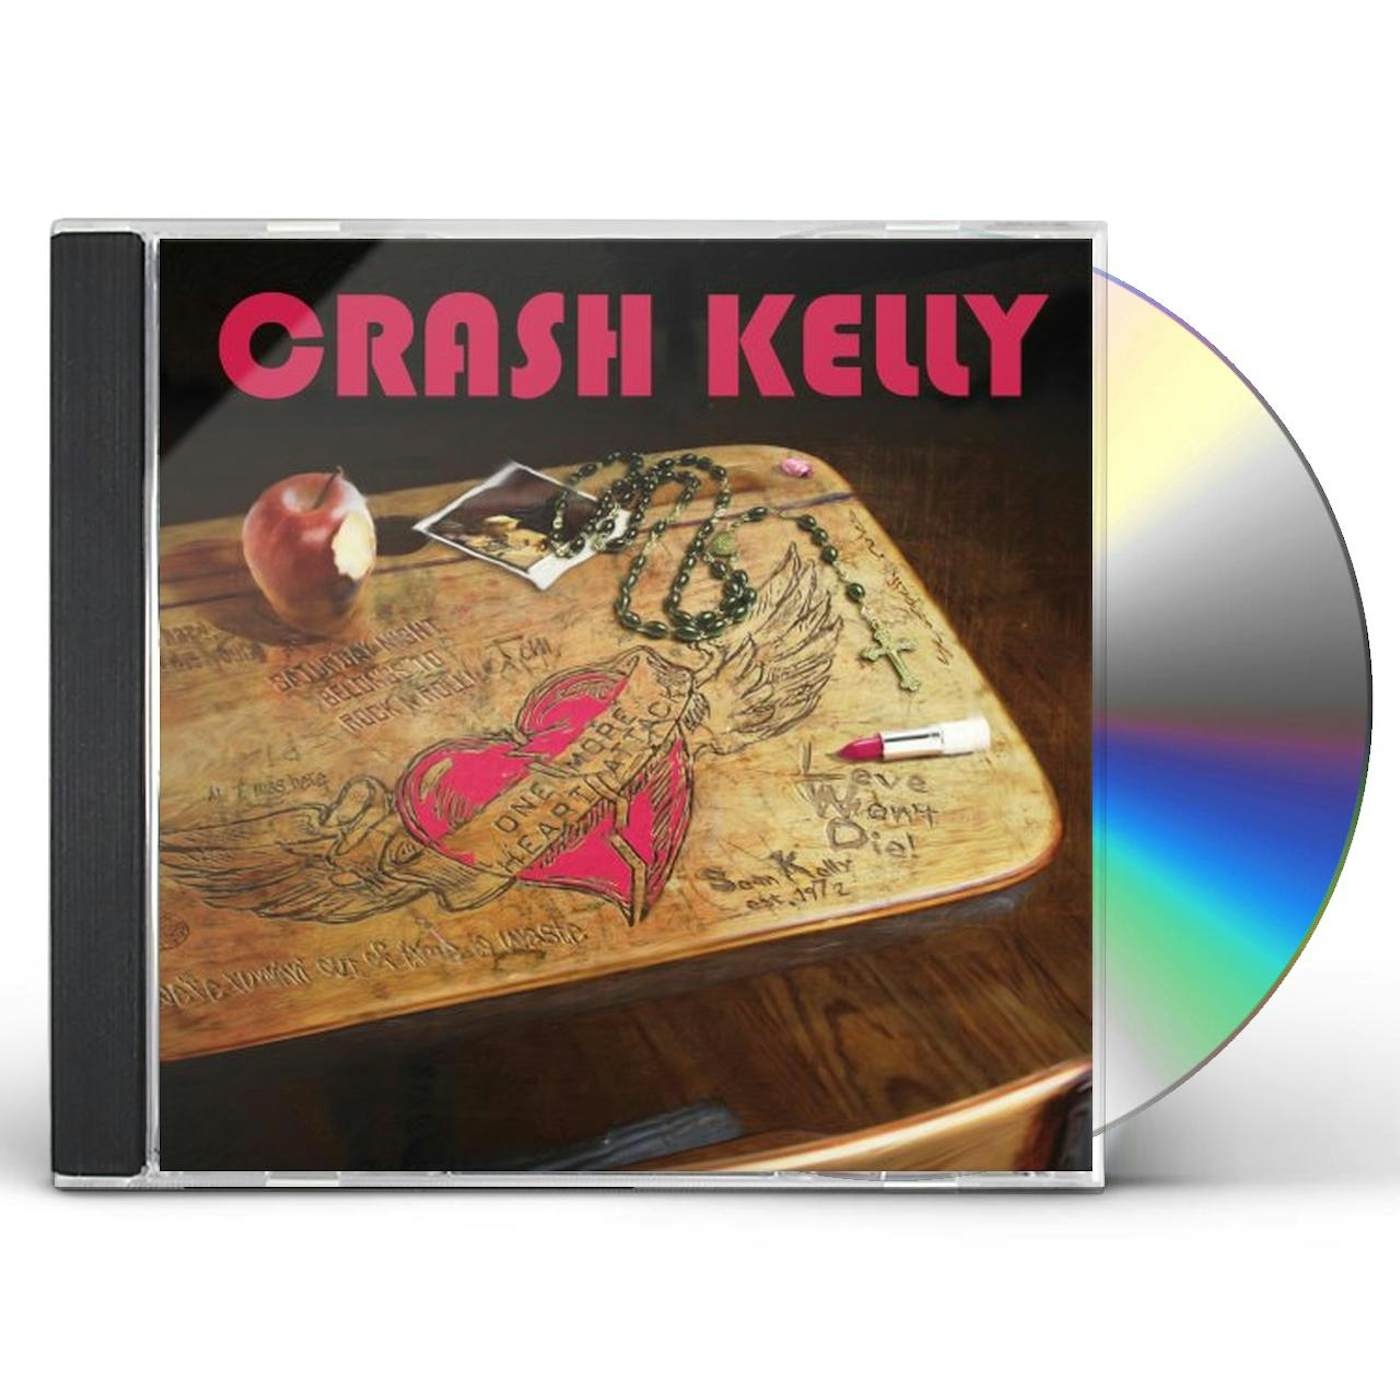 Crash Kelly ONE MORE HEART ATTACK CD